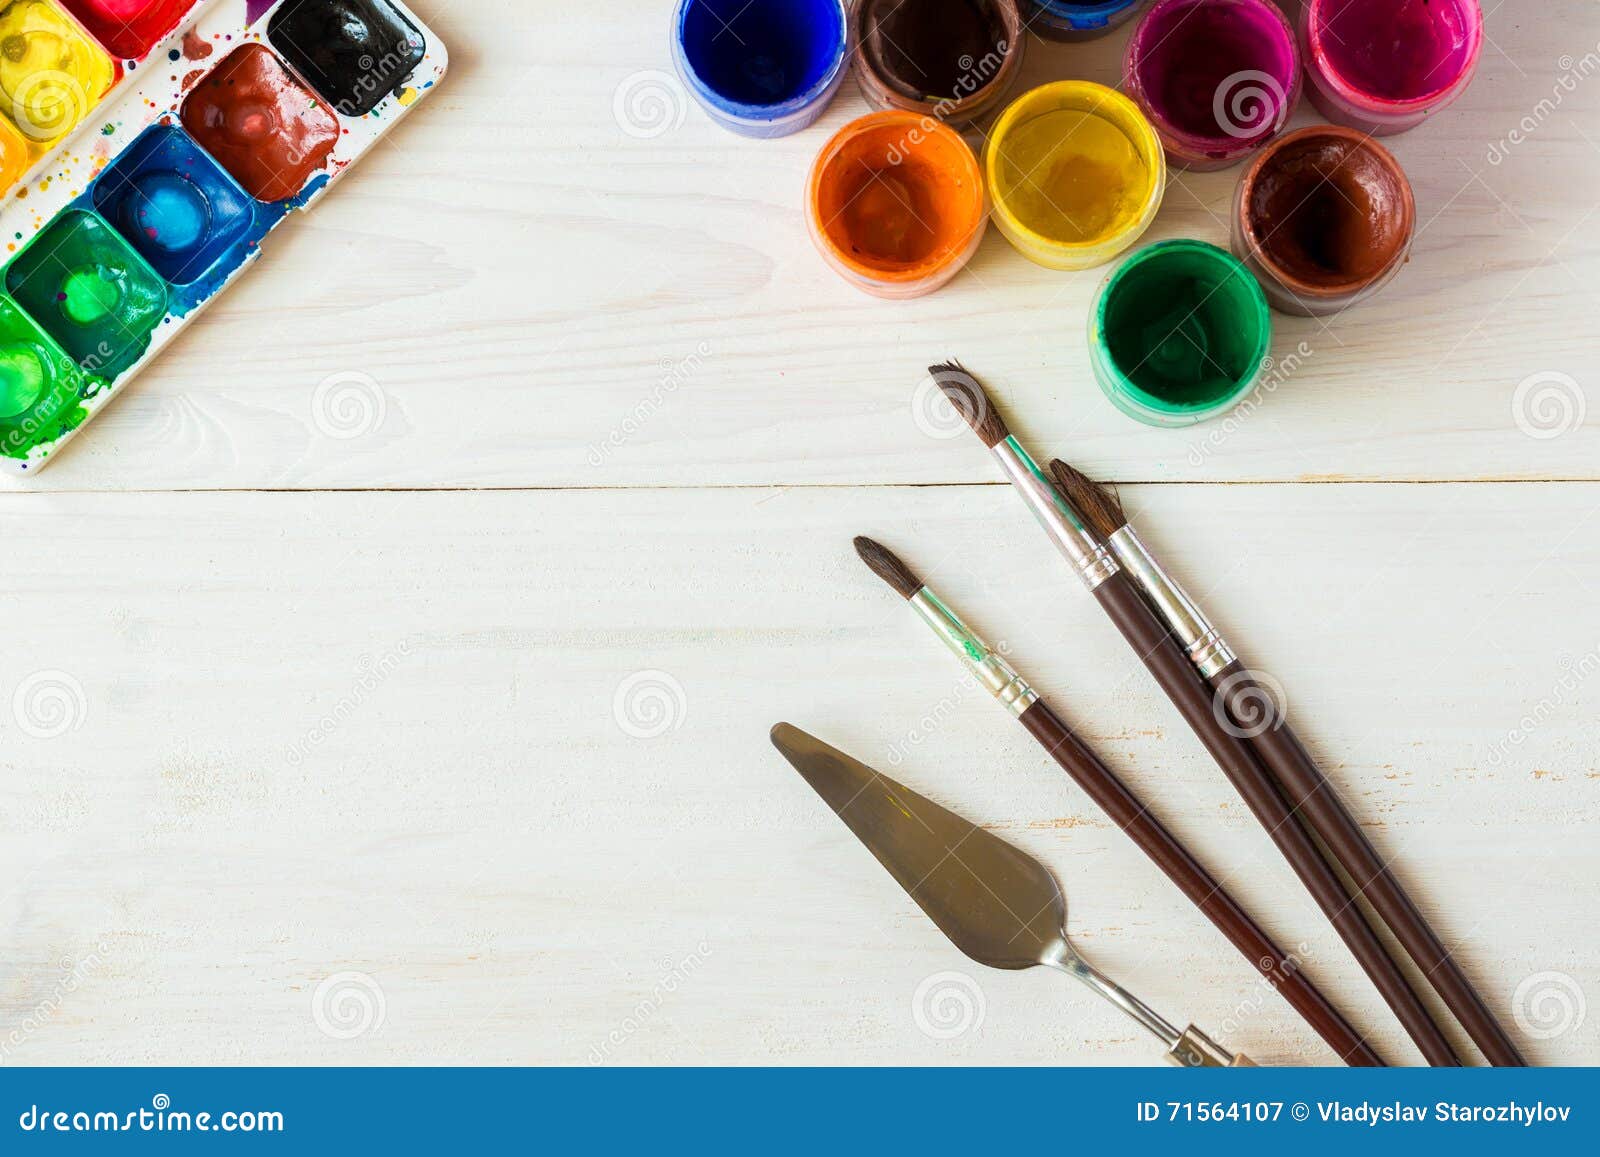 Art of Painting. Painting Set: Brushes, Paints, Watercolor, Acrylic ...